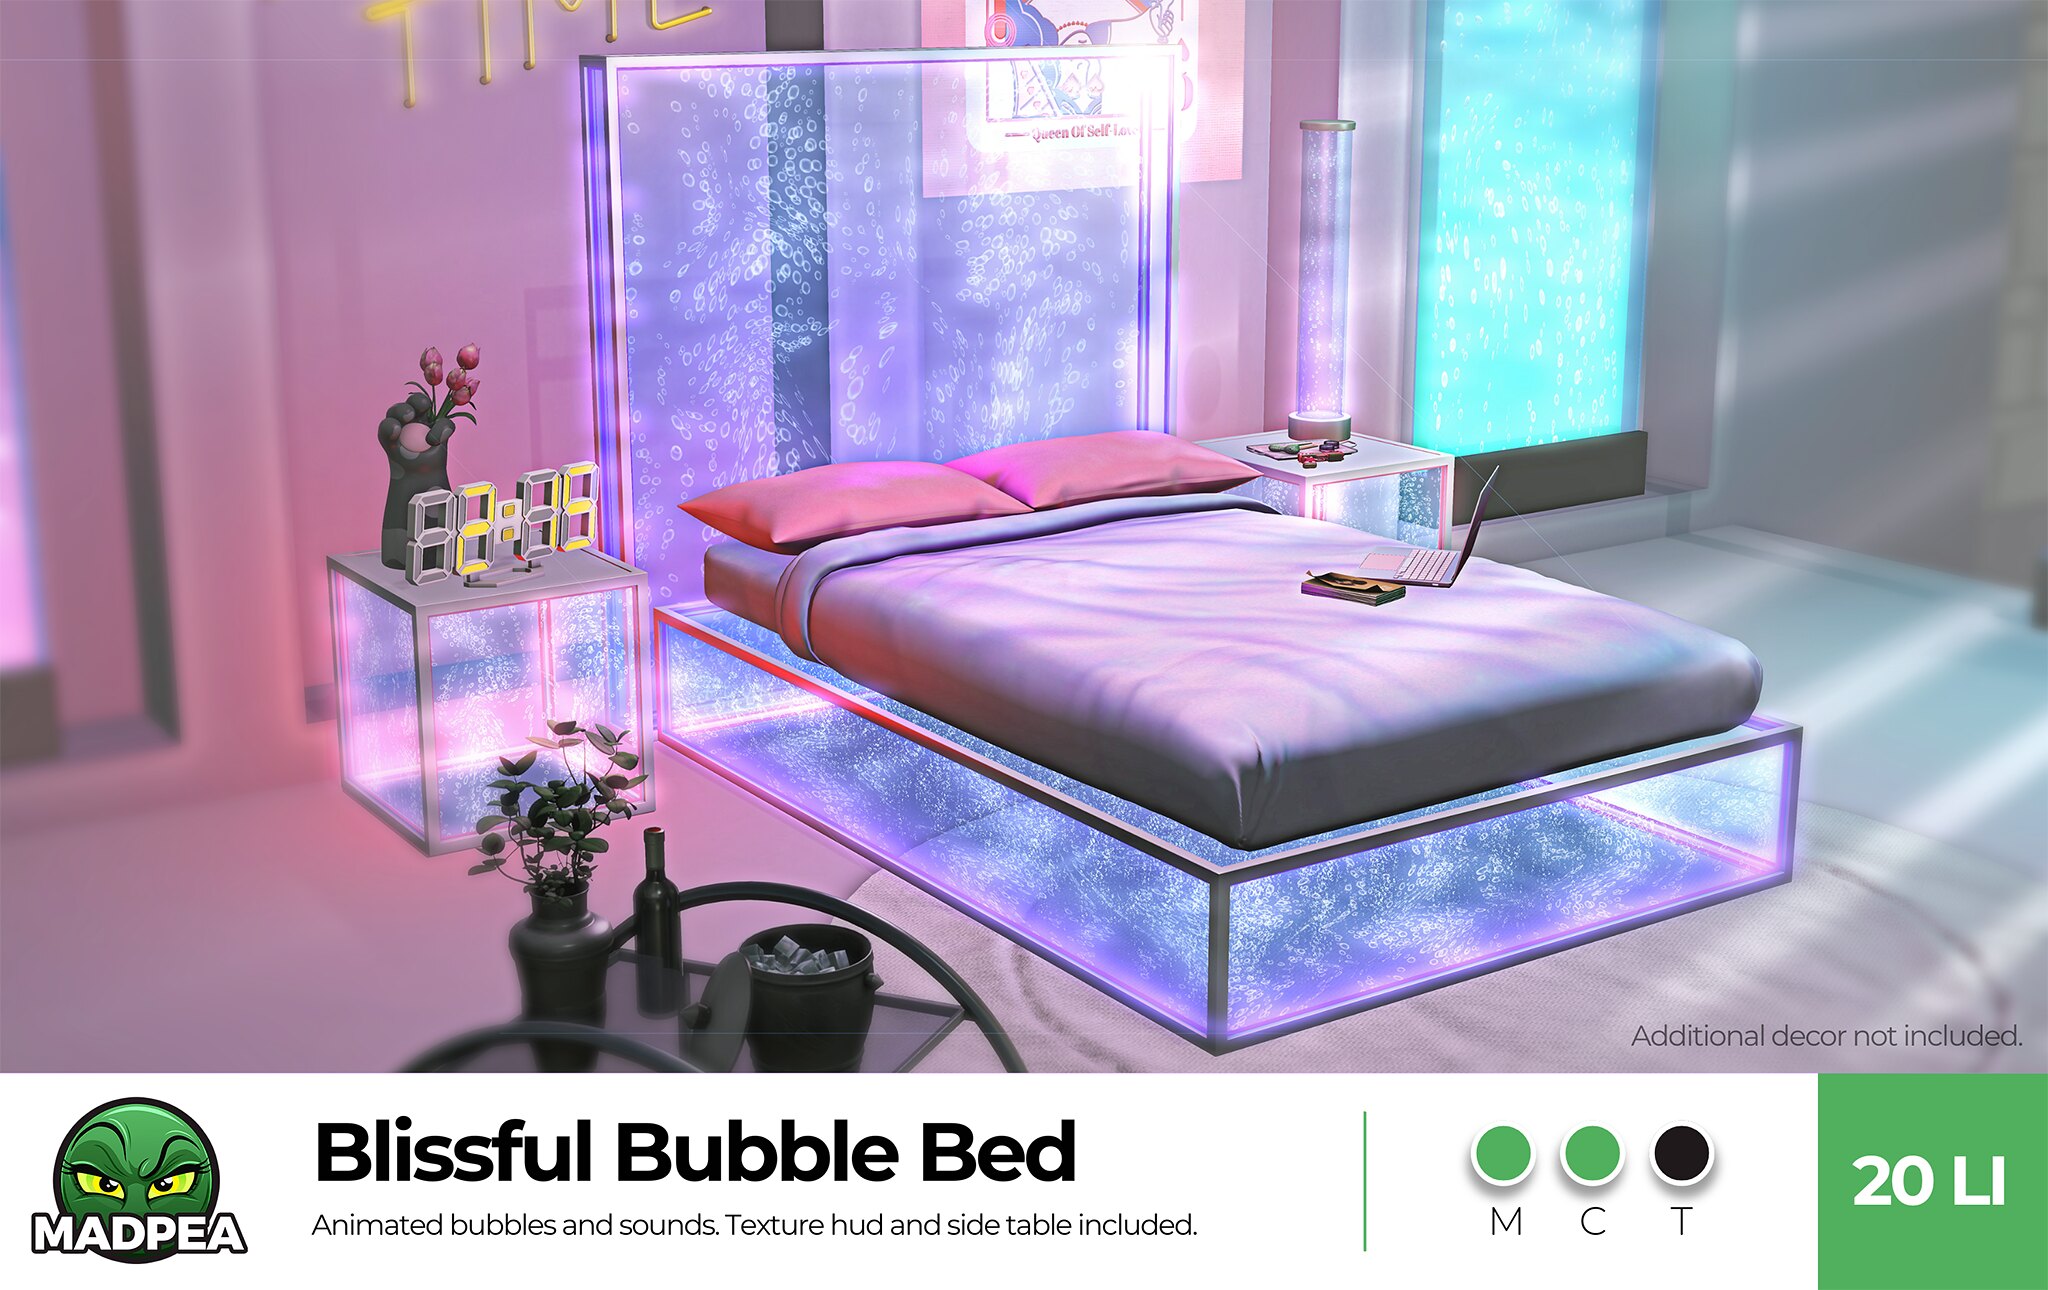 MadPea – Blissful Bubble Bed